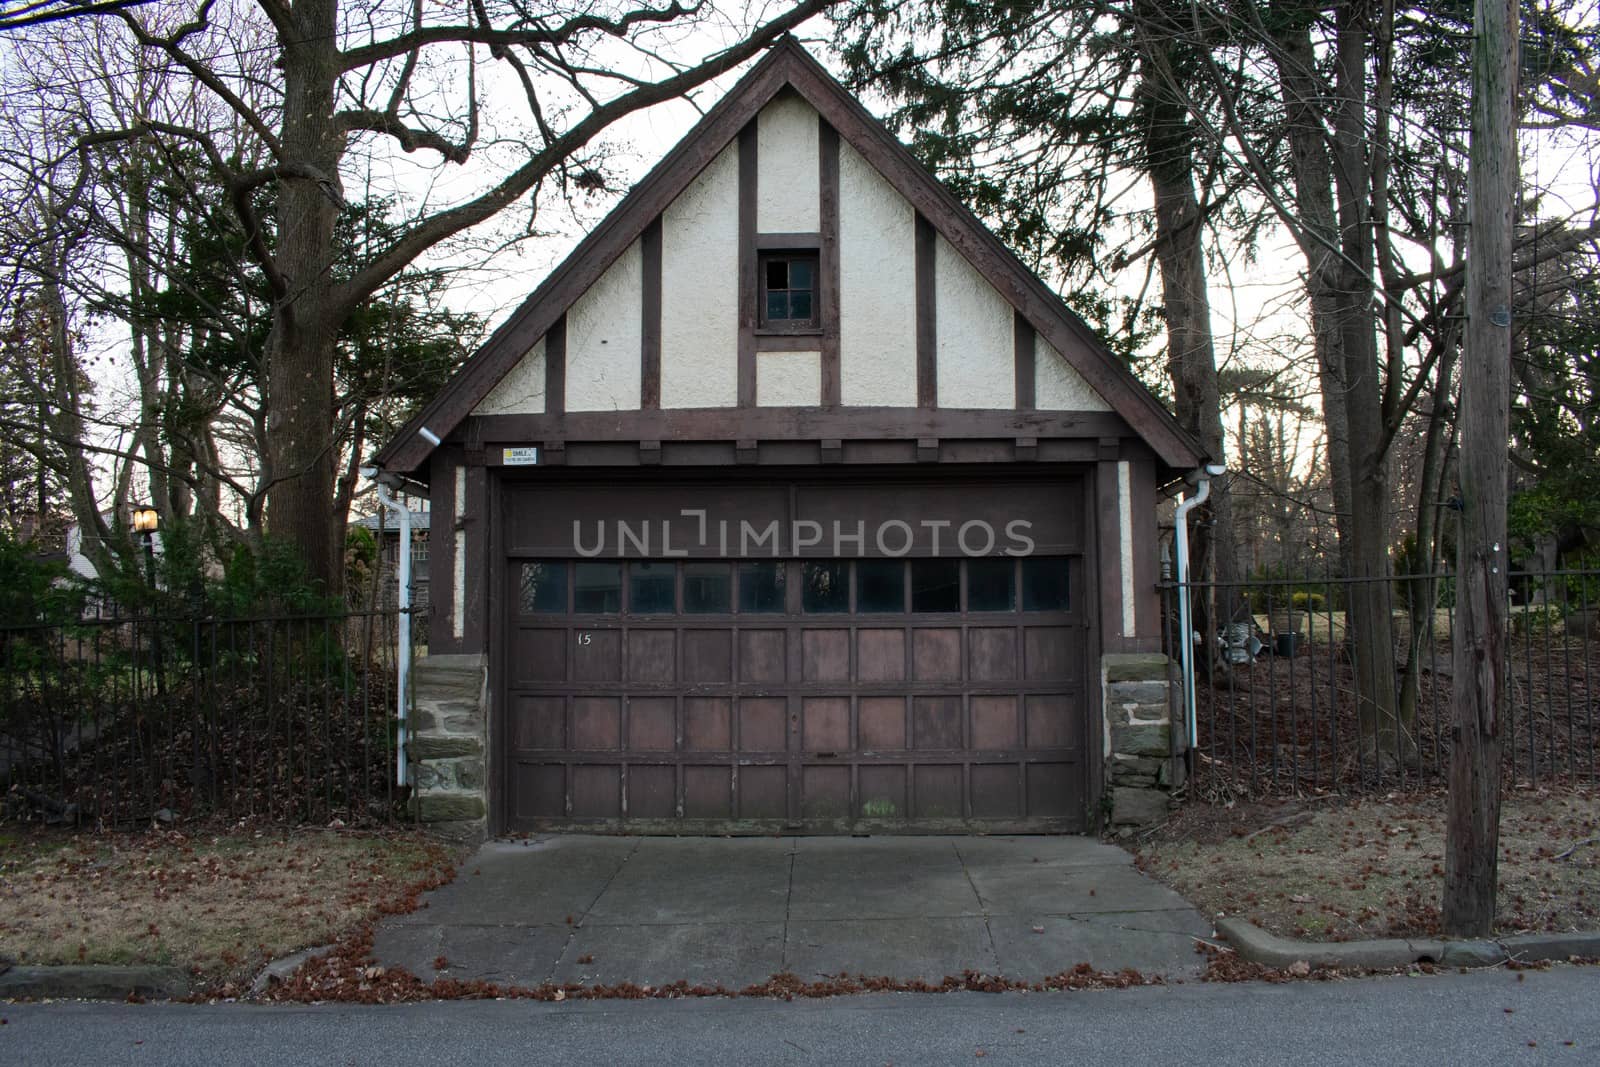 An Old-Fashioned Brown and White Garage by bju12290